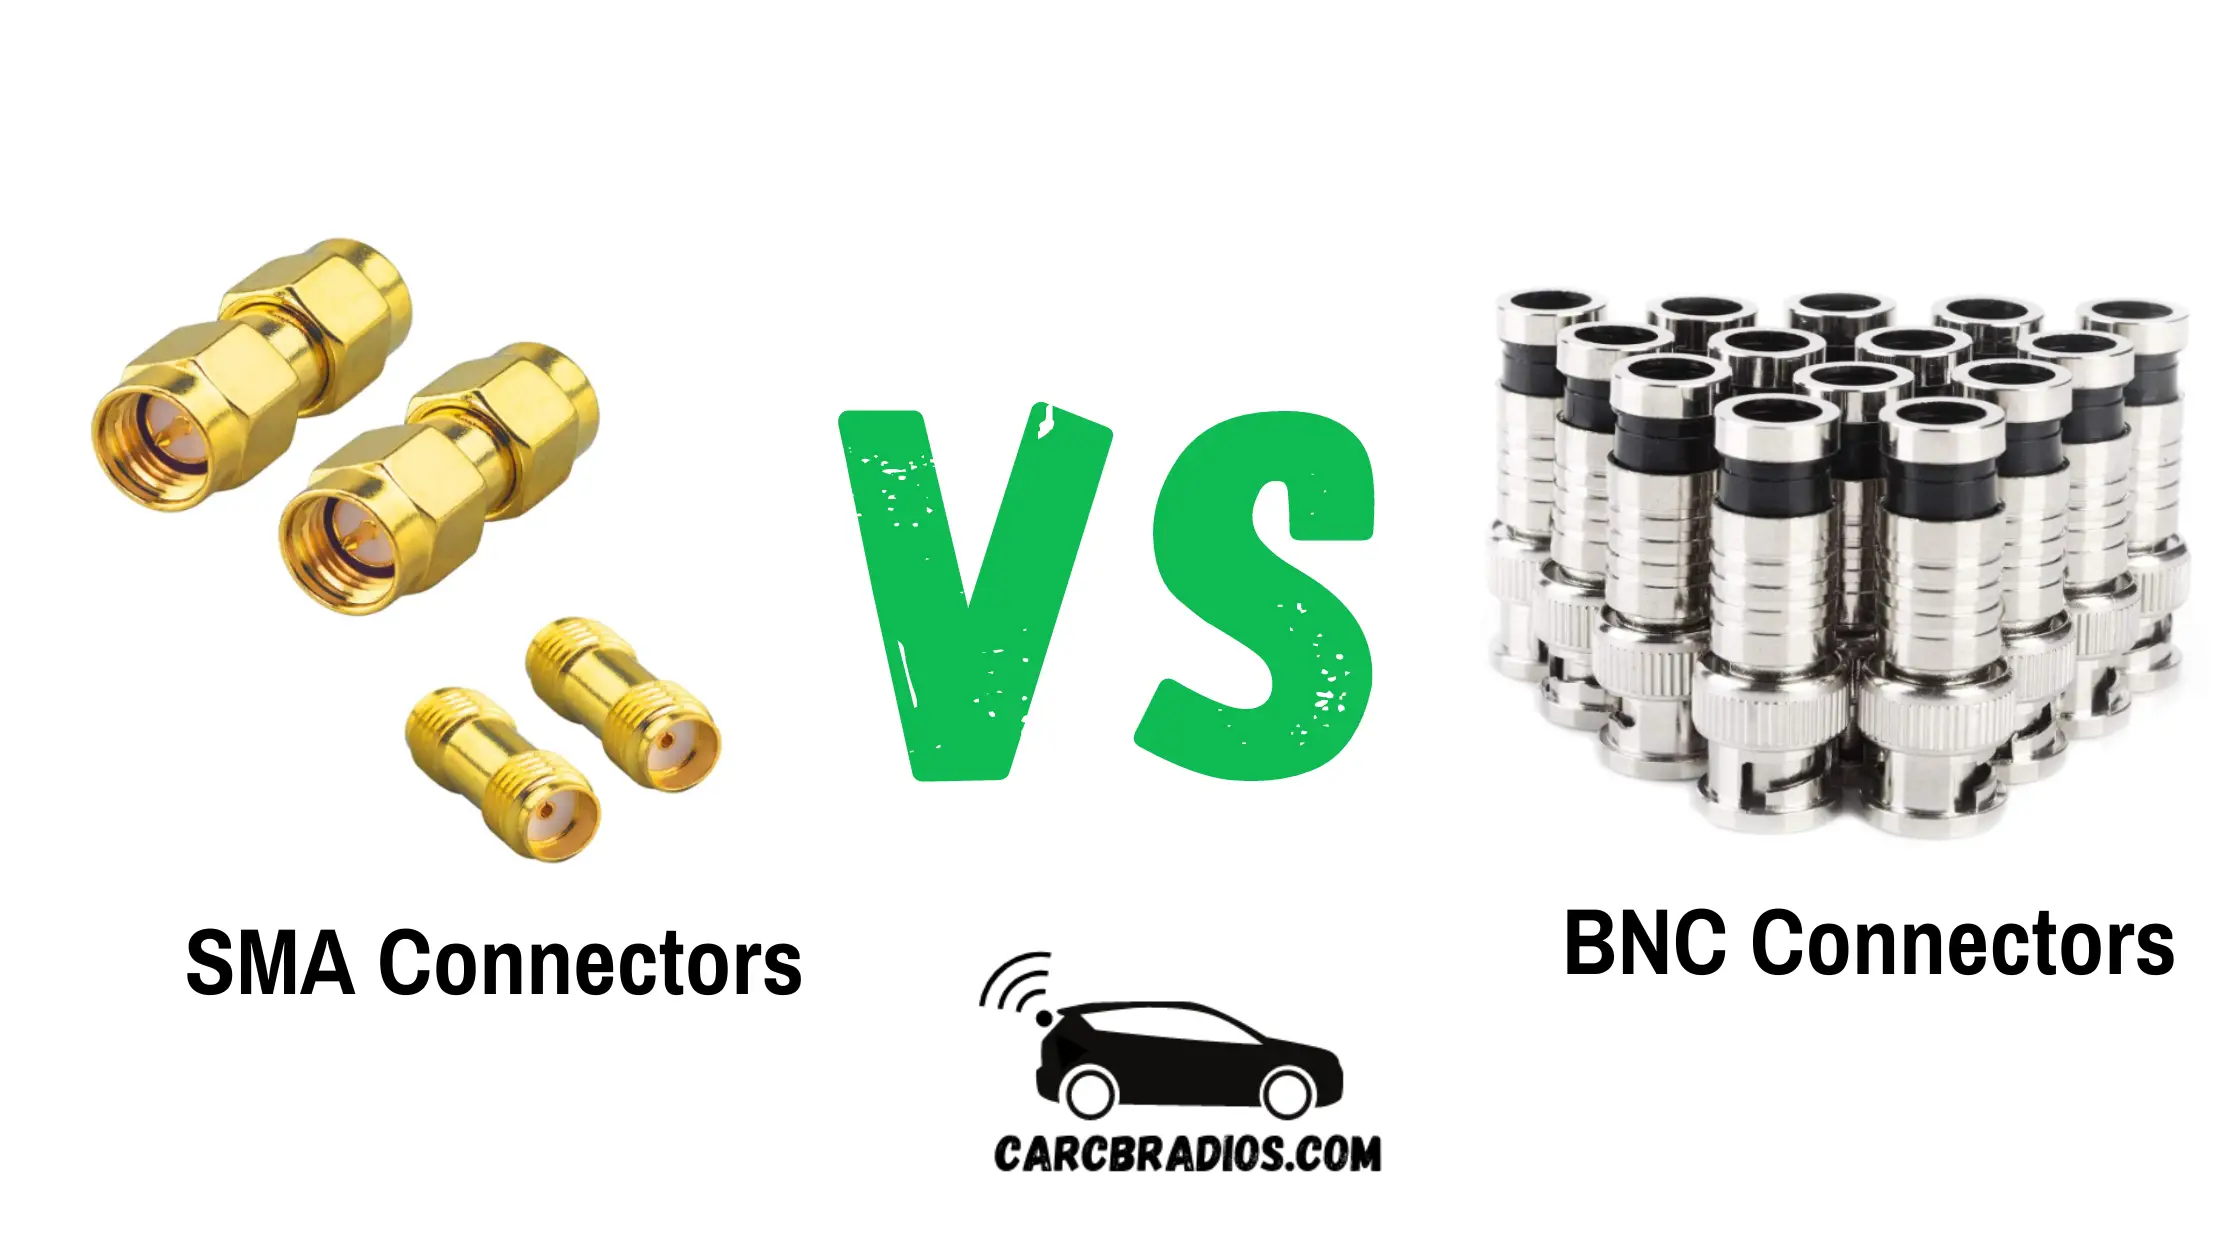 When comparing SMA and BNC connectors, there are several factors to consider, including frequency range, impedance, and durability. SMA connectors typically have a higher frequency range than BNC connectors, making them more suitable for high-frequency applications.